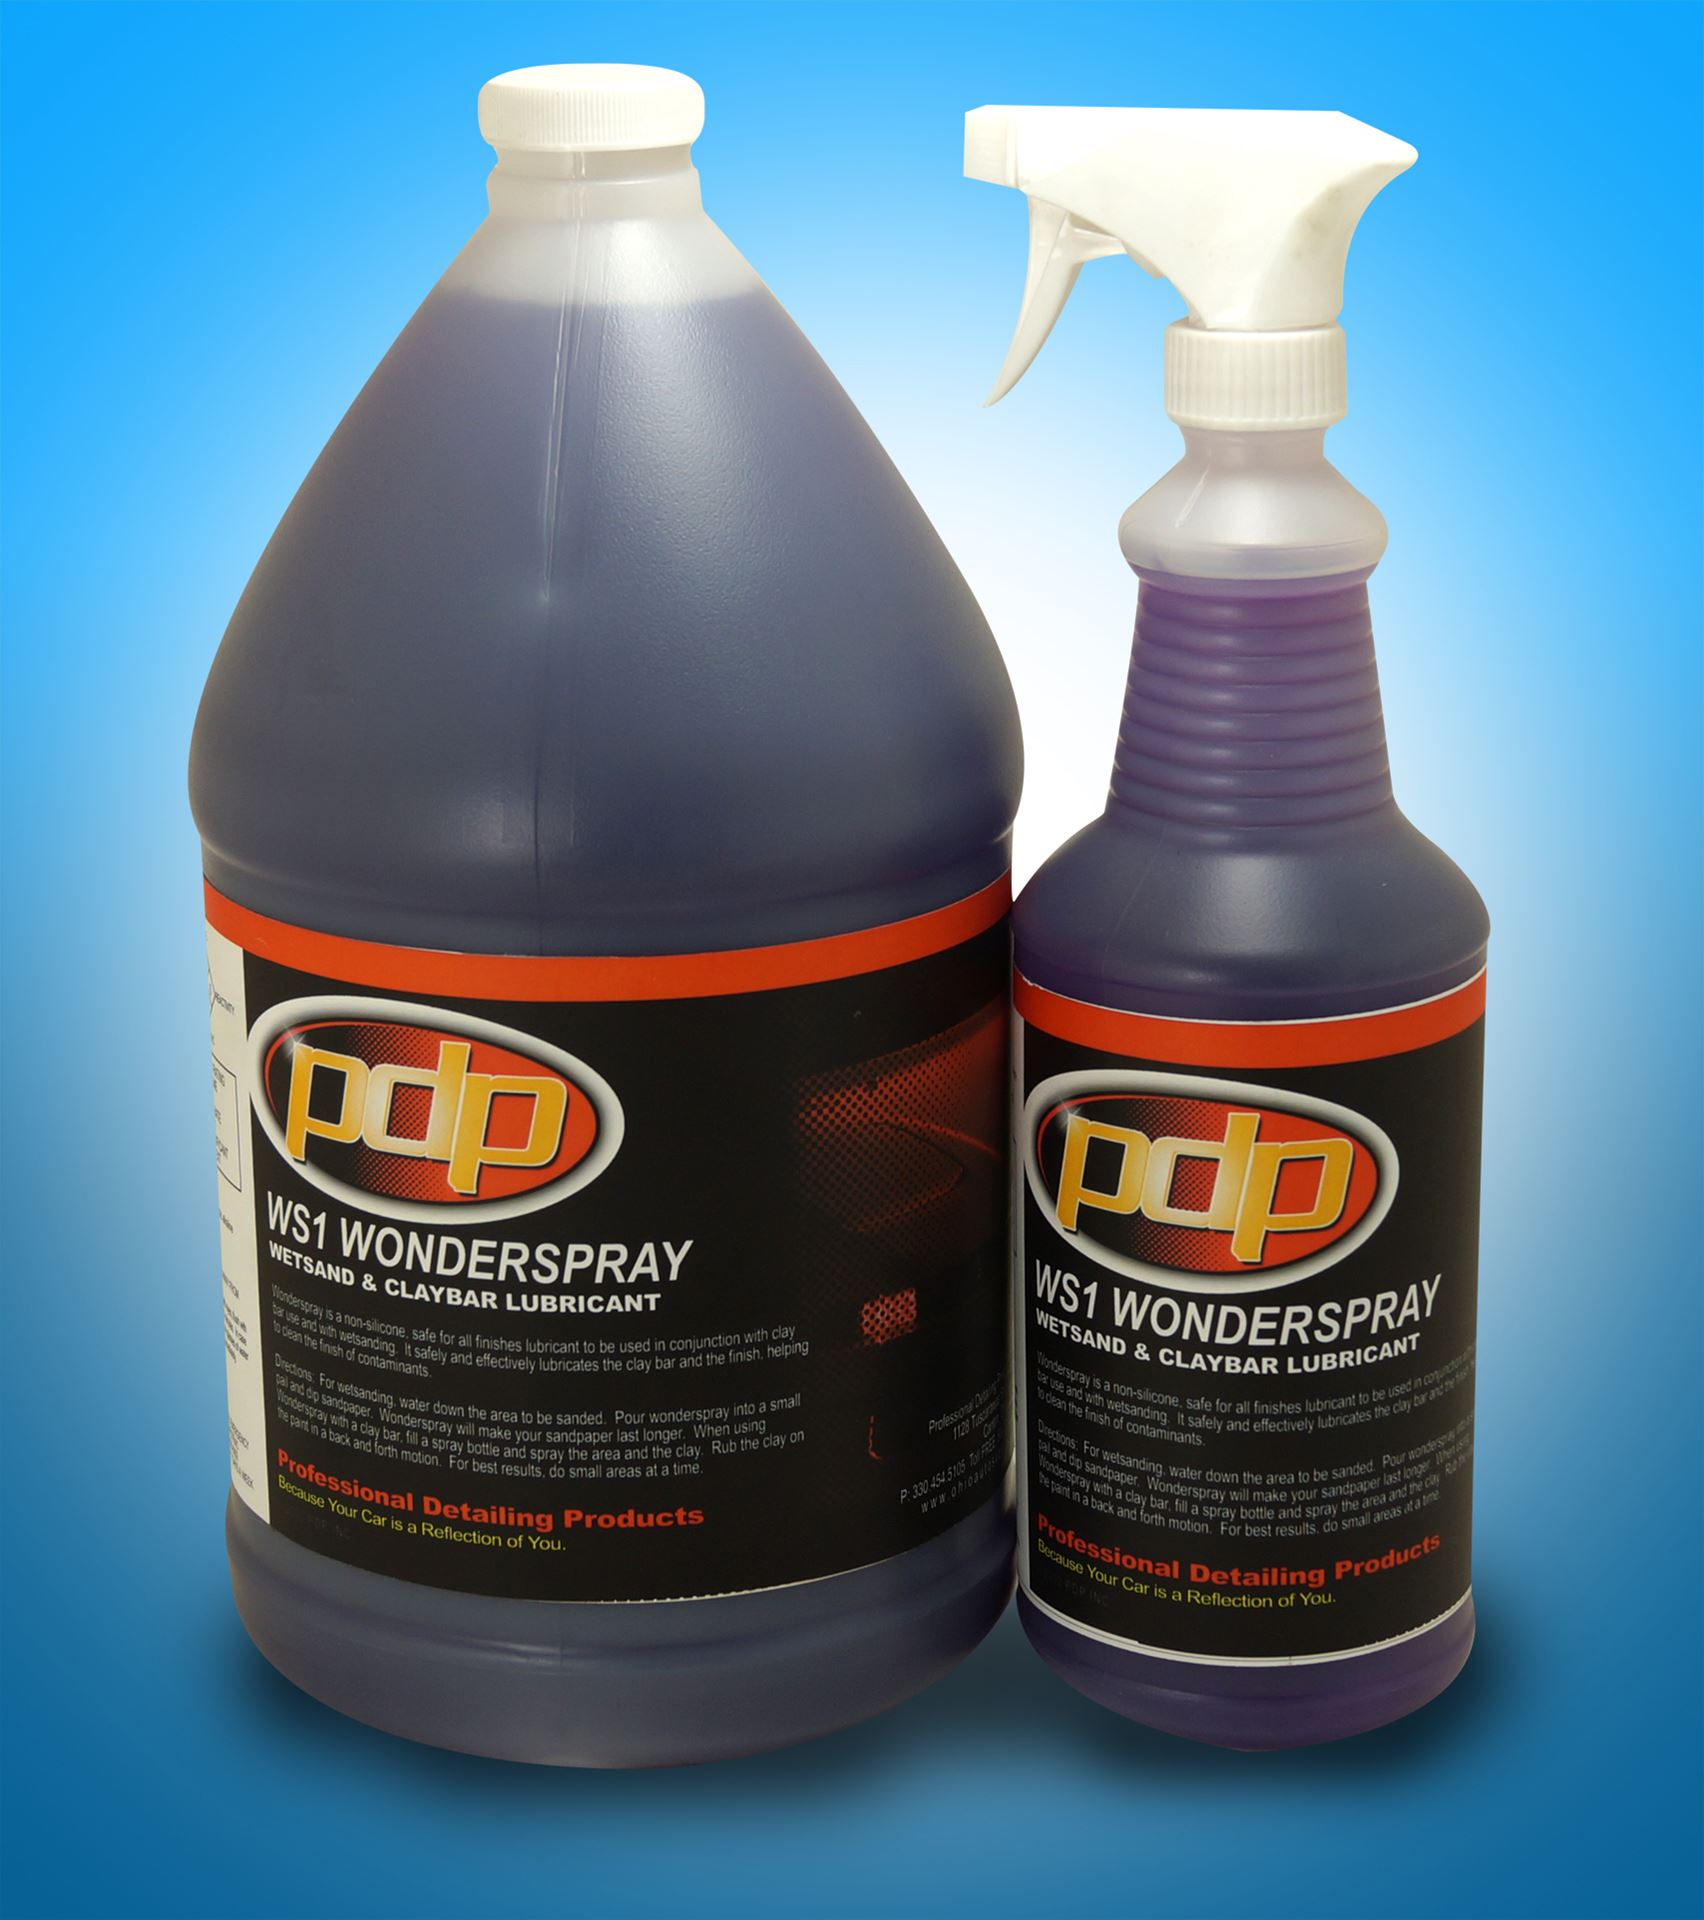 WONDERSPRAY. Professional Detailing Products, Because Your Car is a  Reflection of You